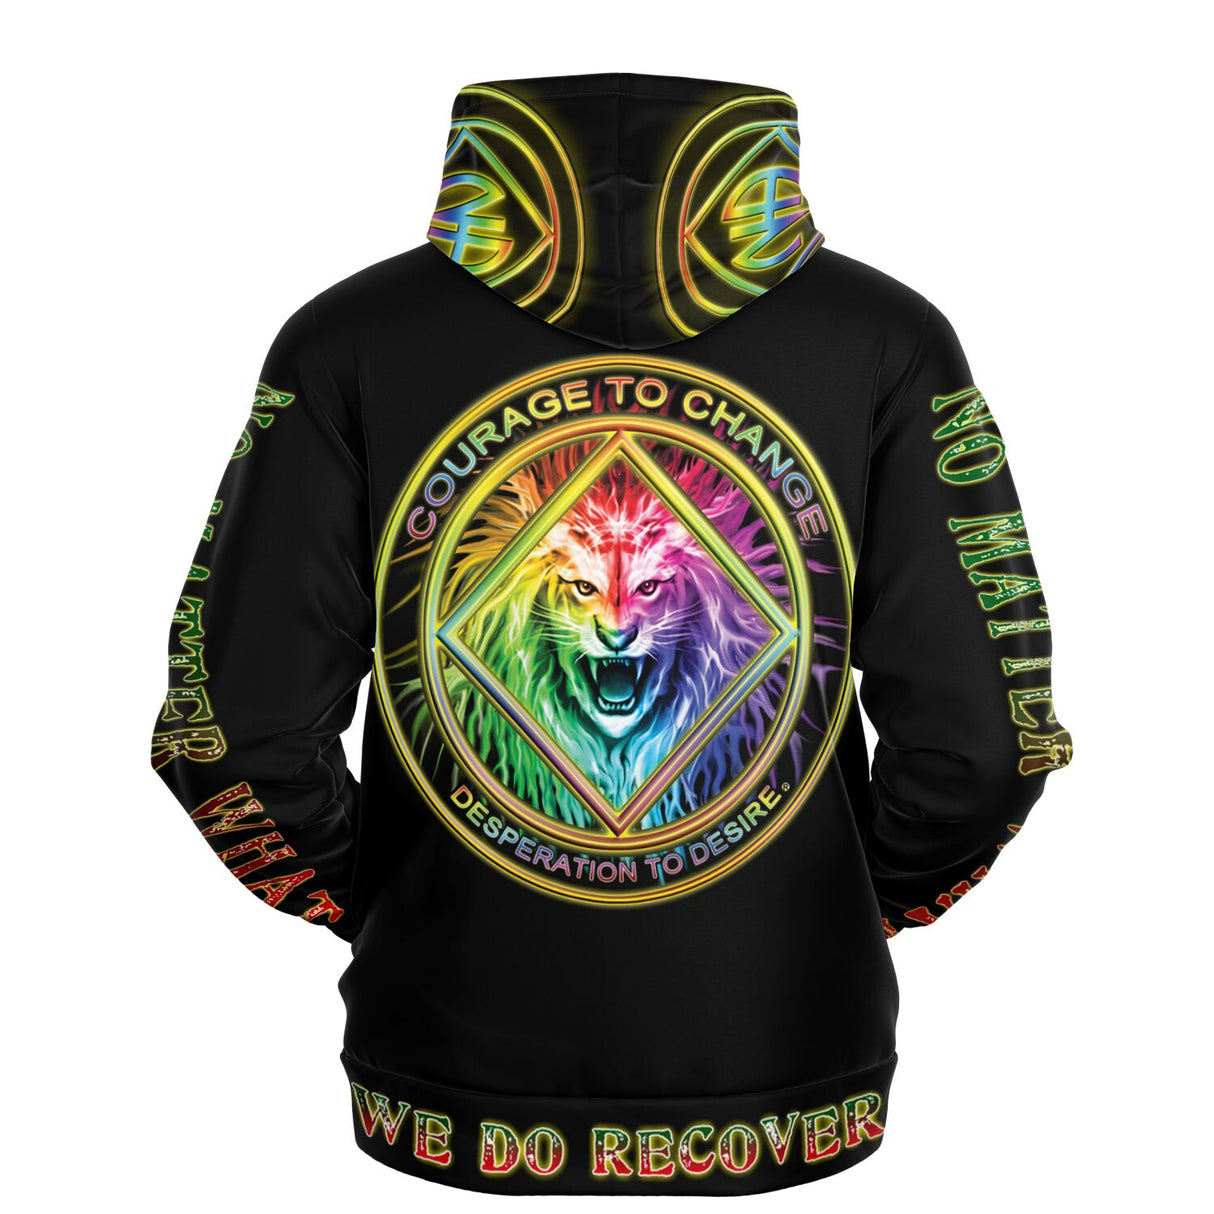 Courage To Change V.1 AOP Hoodie